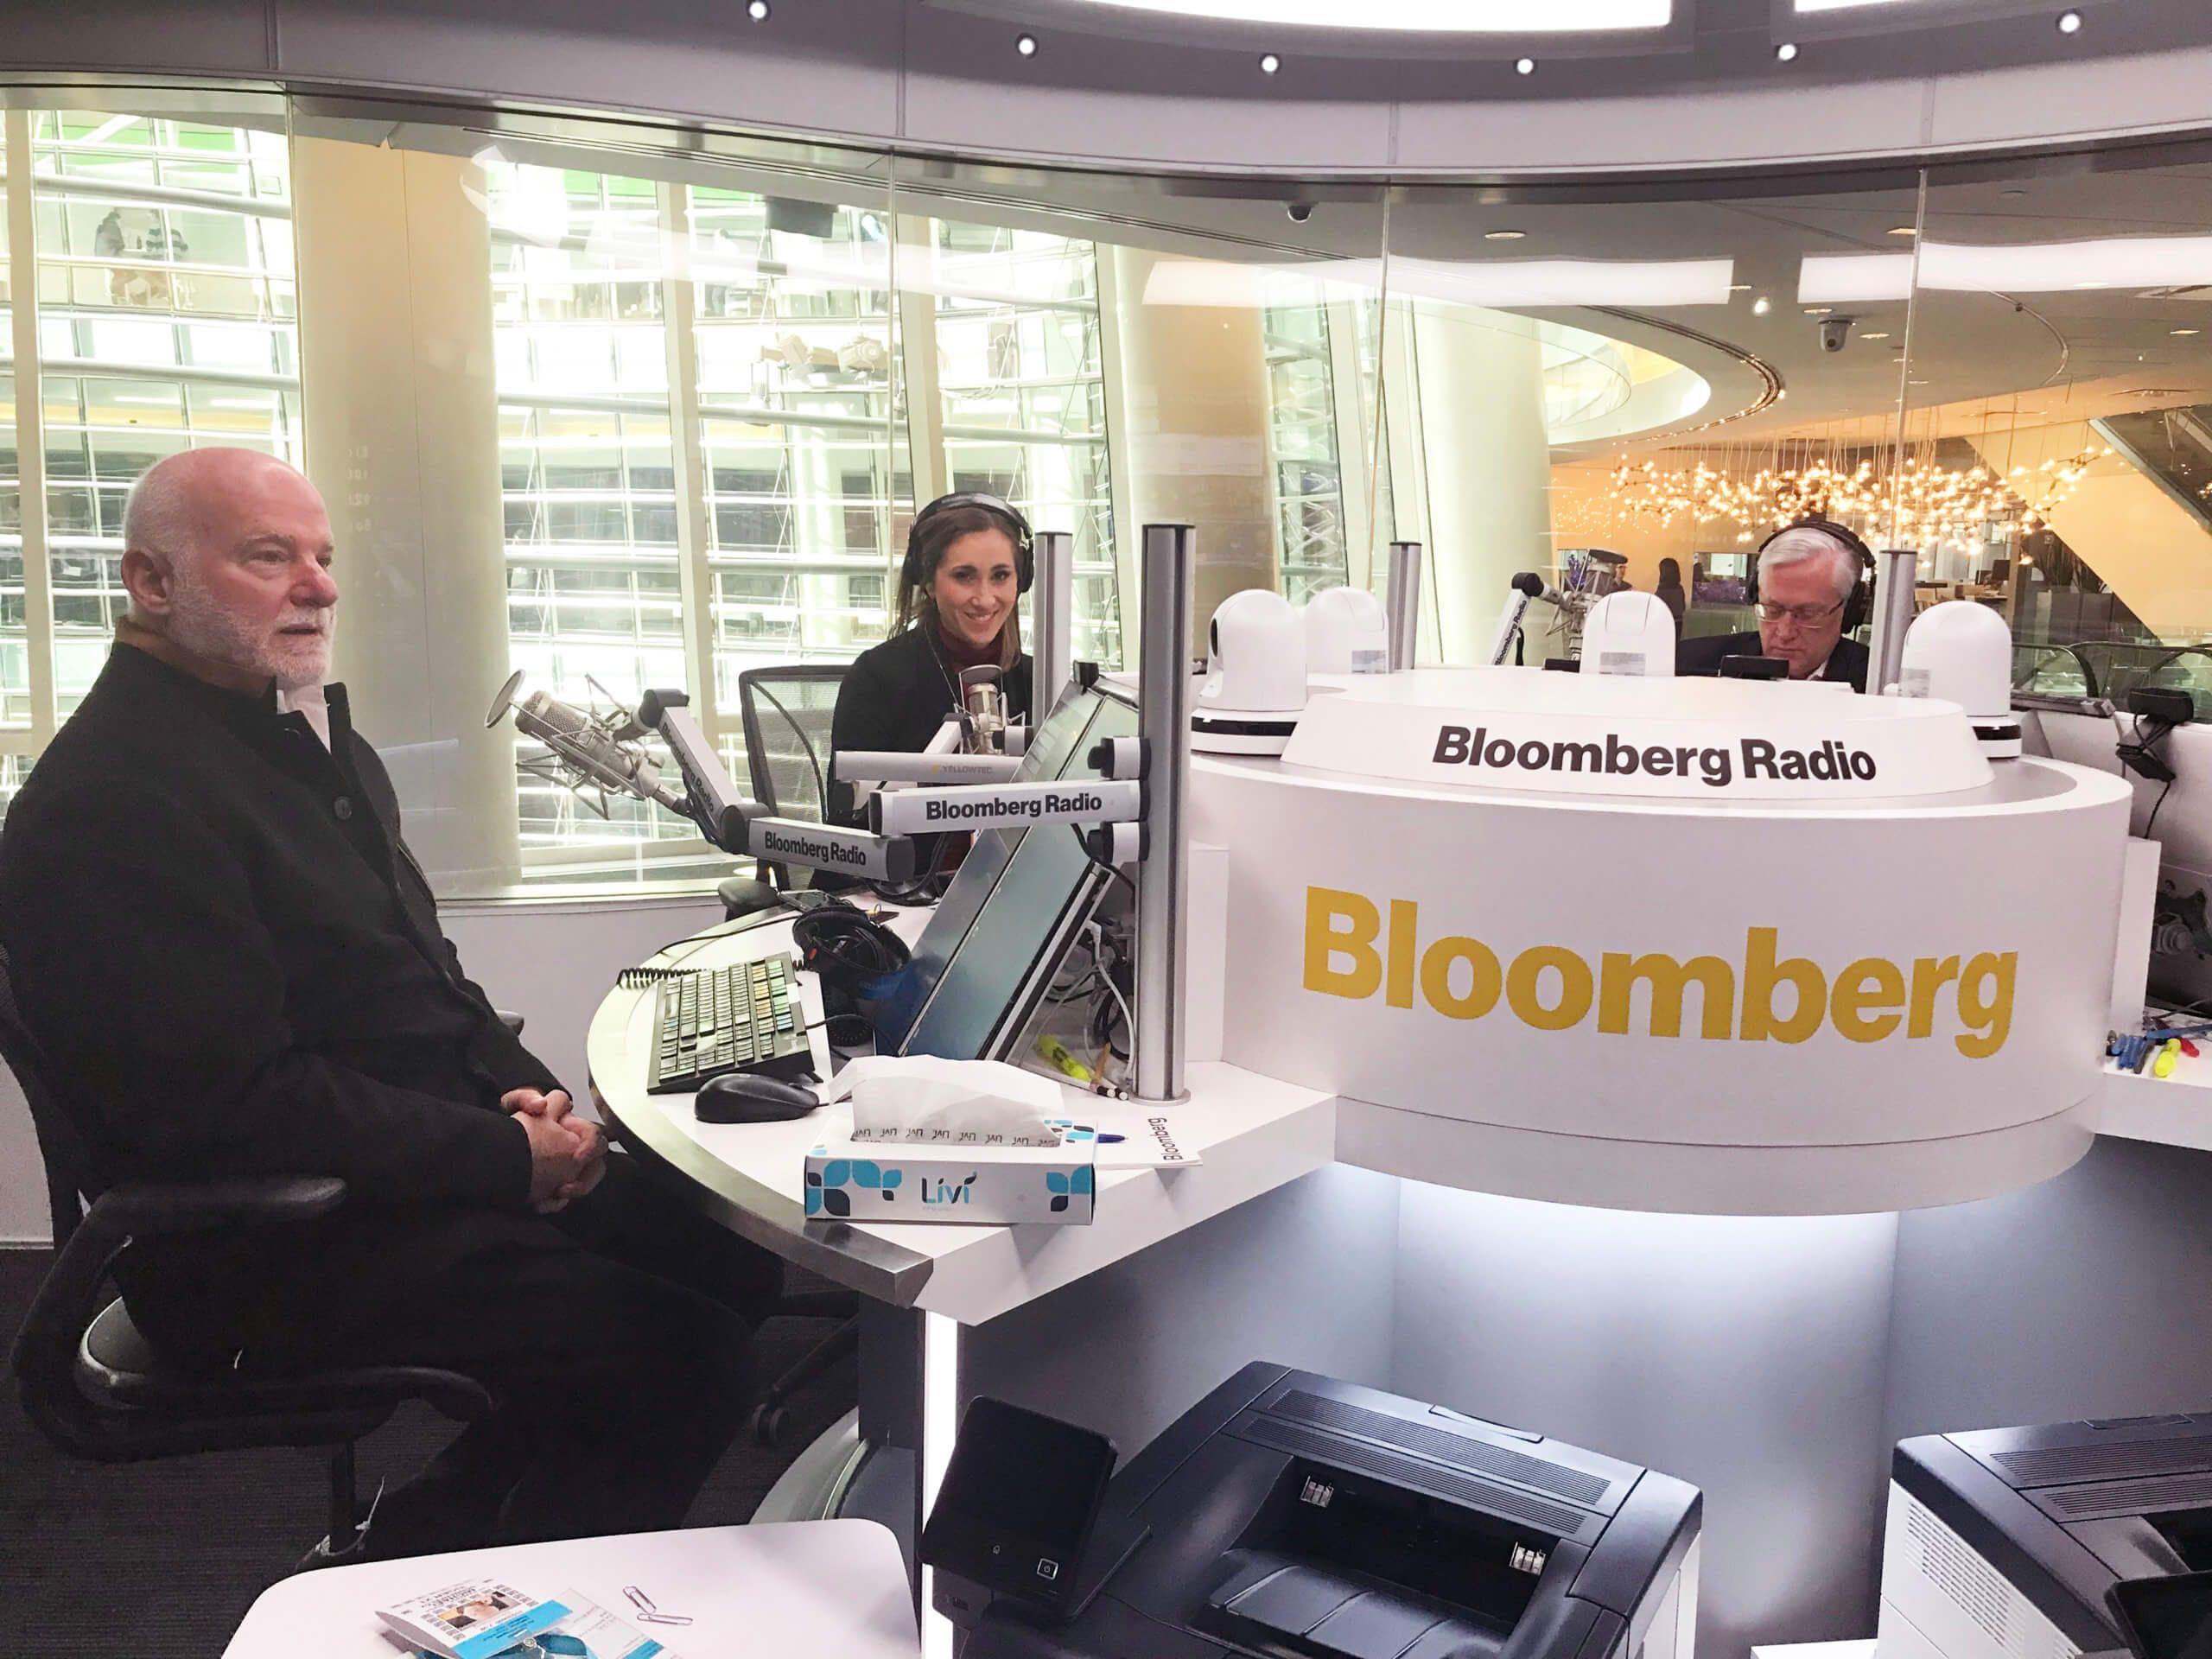 BLOOMBERG RADIO INTERVIEWS TIGER 21 FOUNDER ON PUTTING TOGETHER AN ALL-WEATHER PORTFOLIO